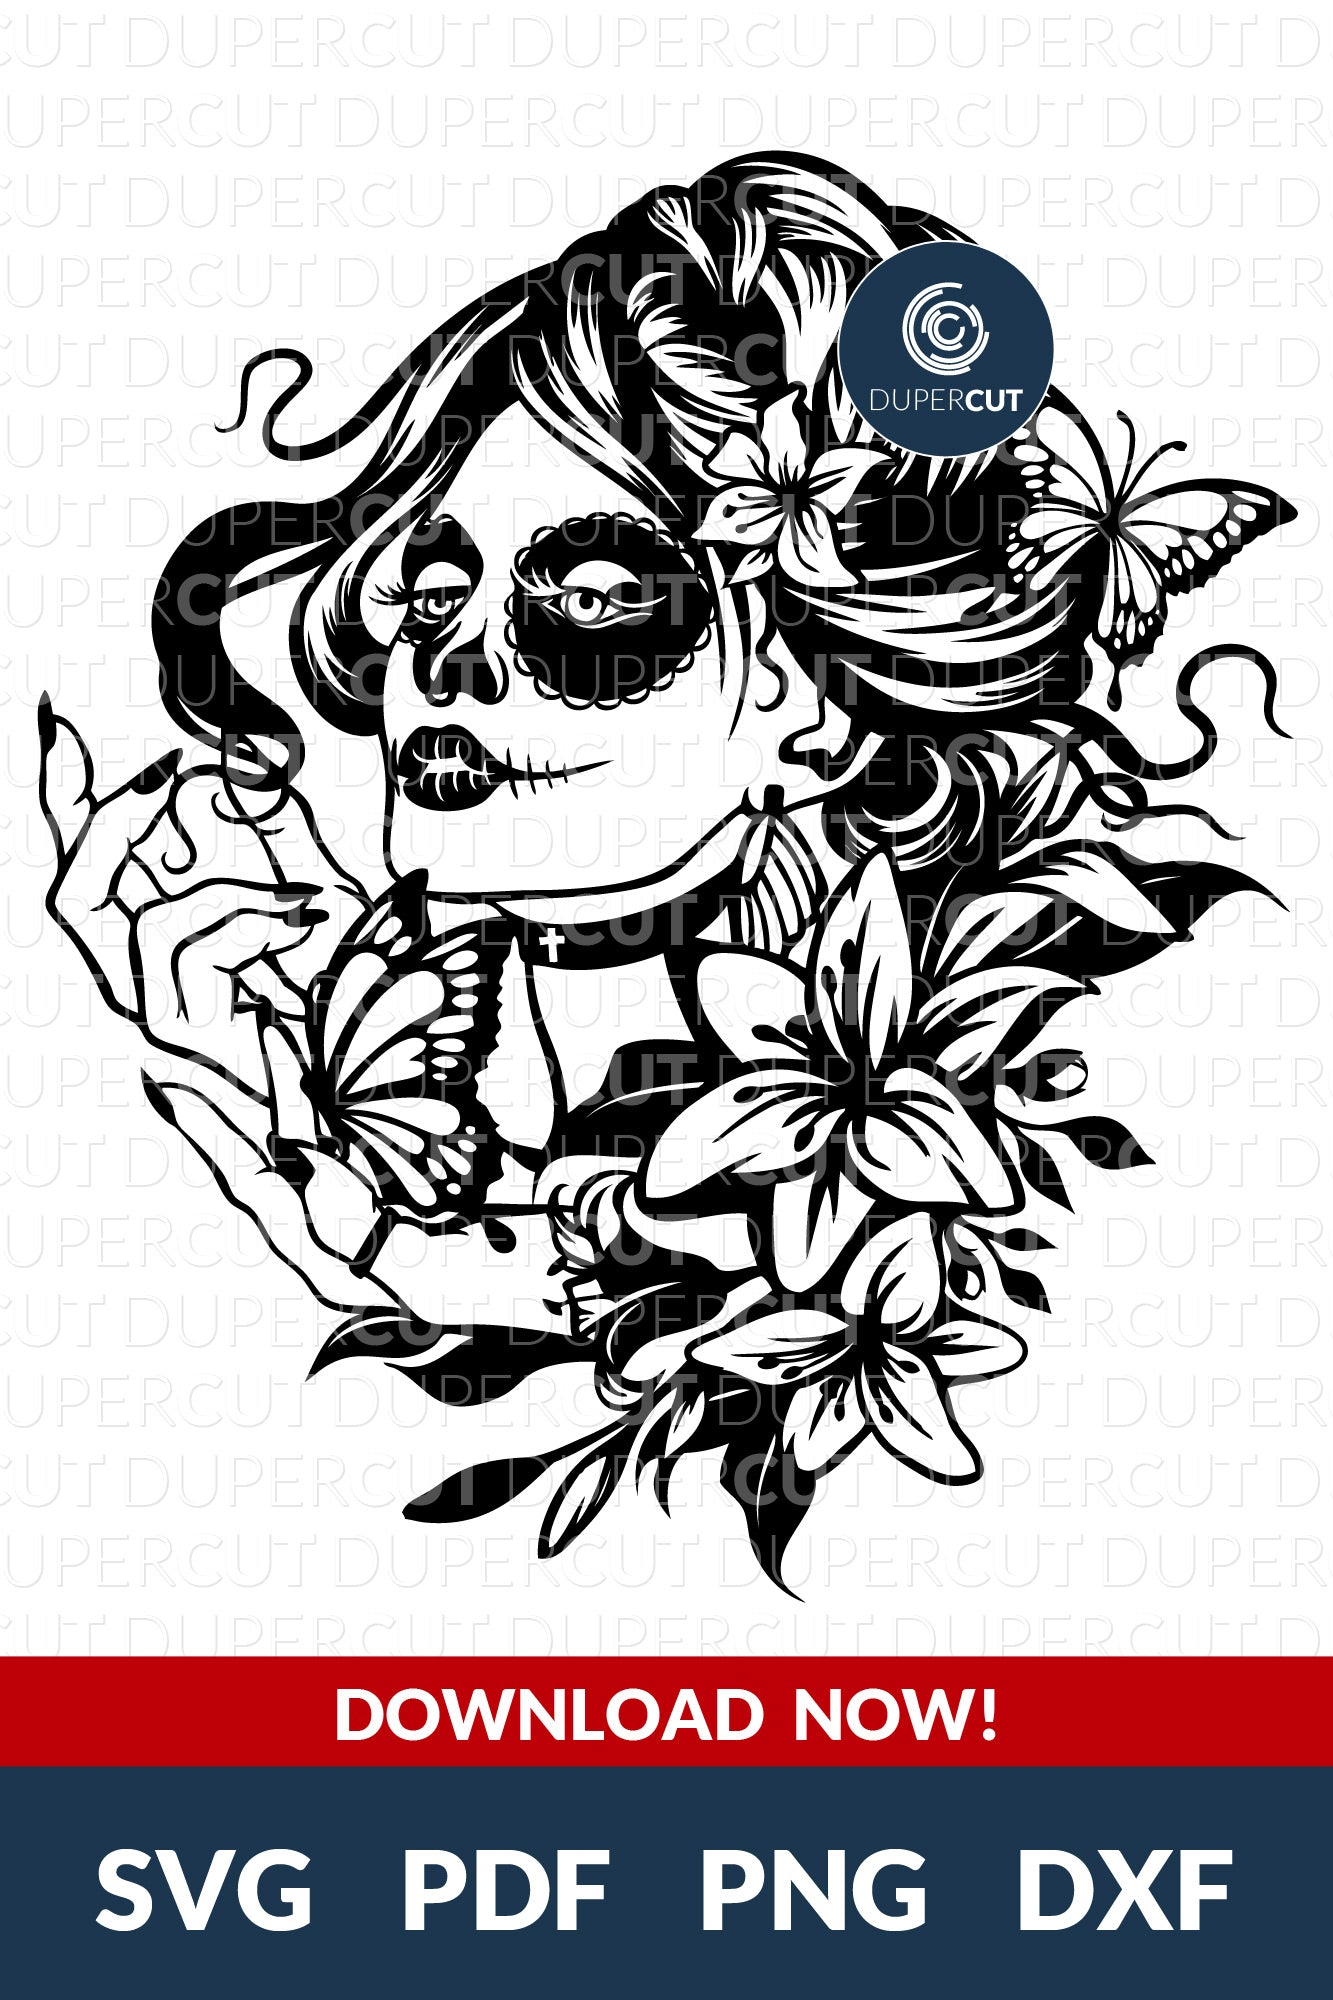 SUGAR SKULL WITH BUTTERFLY - SVG / PDF / DXF / PNG – DuperCut